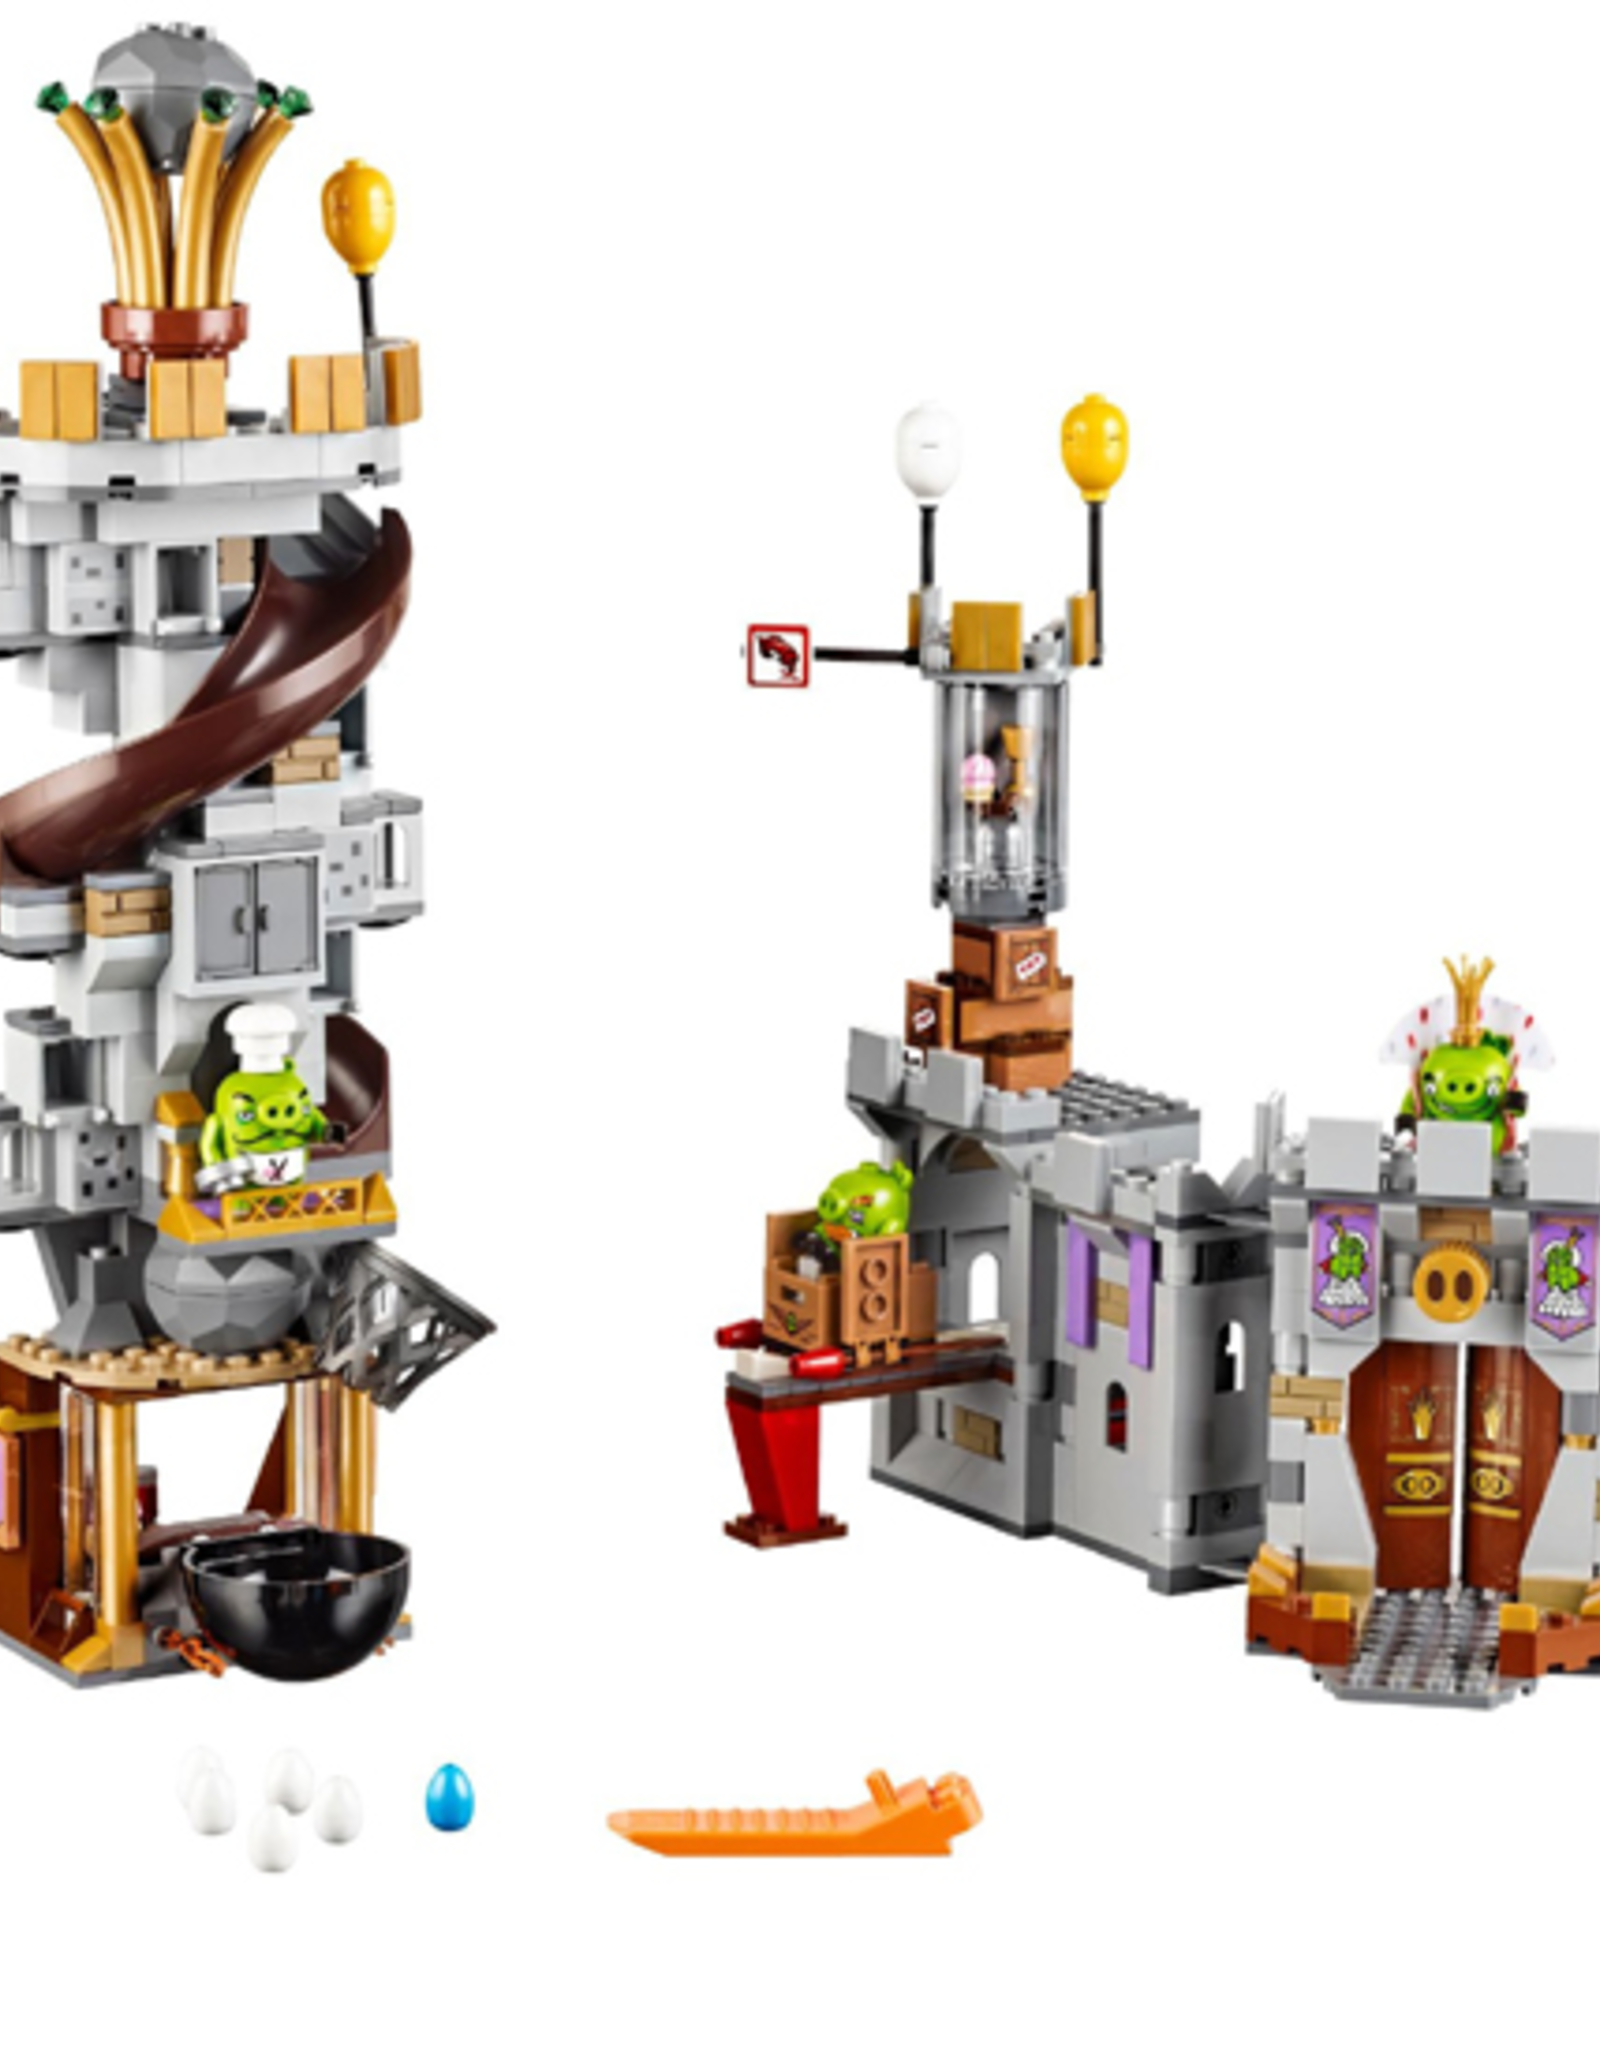 LEGO LEGO 75826 King Pig's Castle Angry Birds